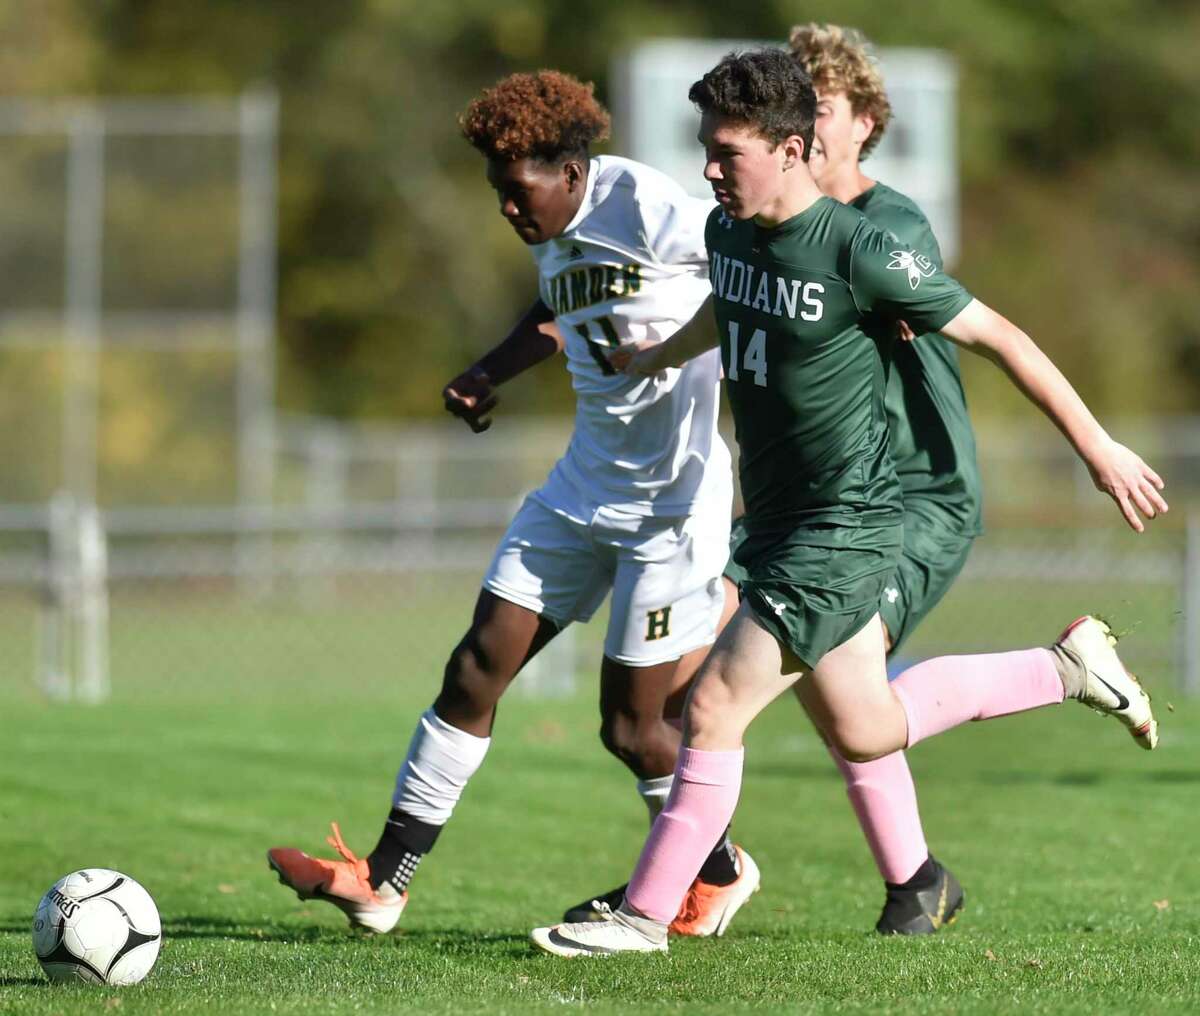 Guilford, Connecticut - Tuesday, October 15, 2019: Guilford H.S vs. Hamden H.S. during the first half of boys soccer Tuesday afternoon at Bittner Park in Guilford.